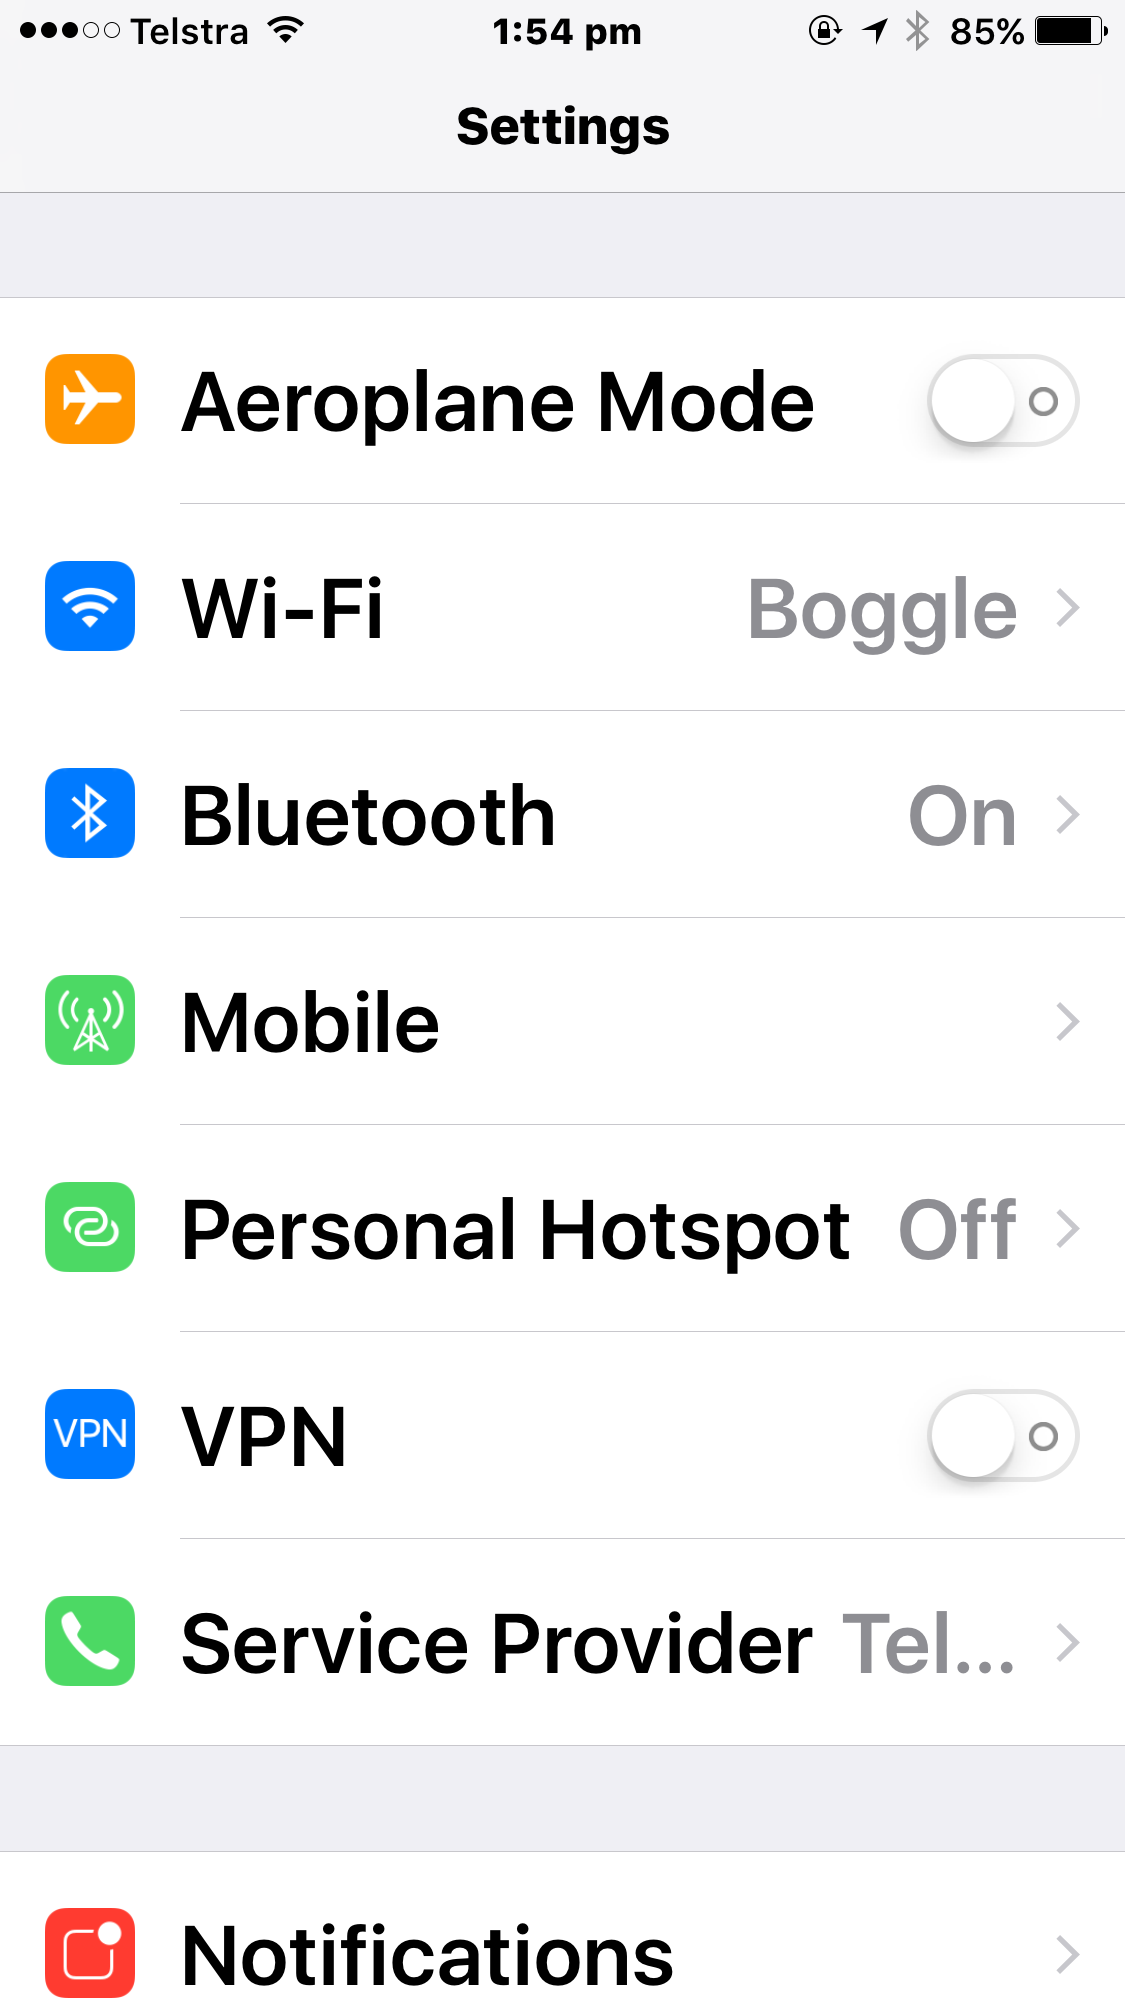 iPhone settings screen with large bold text